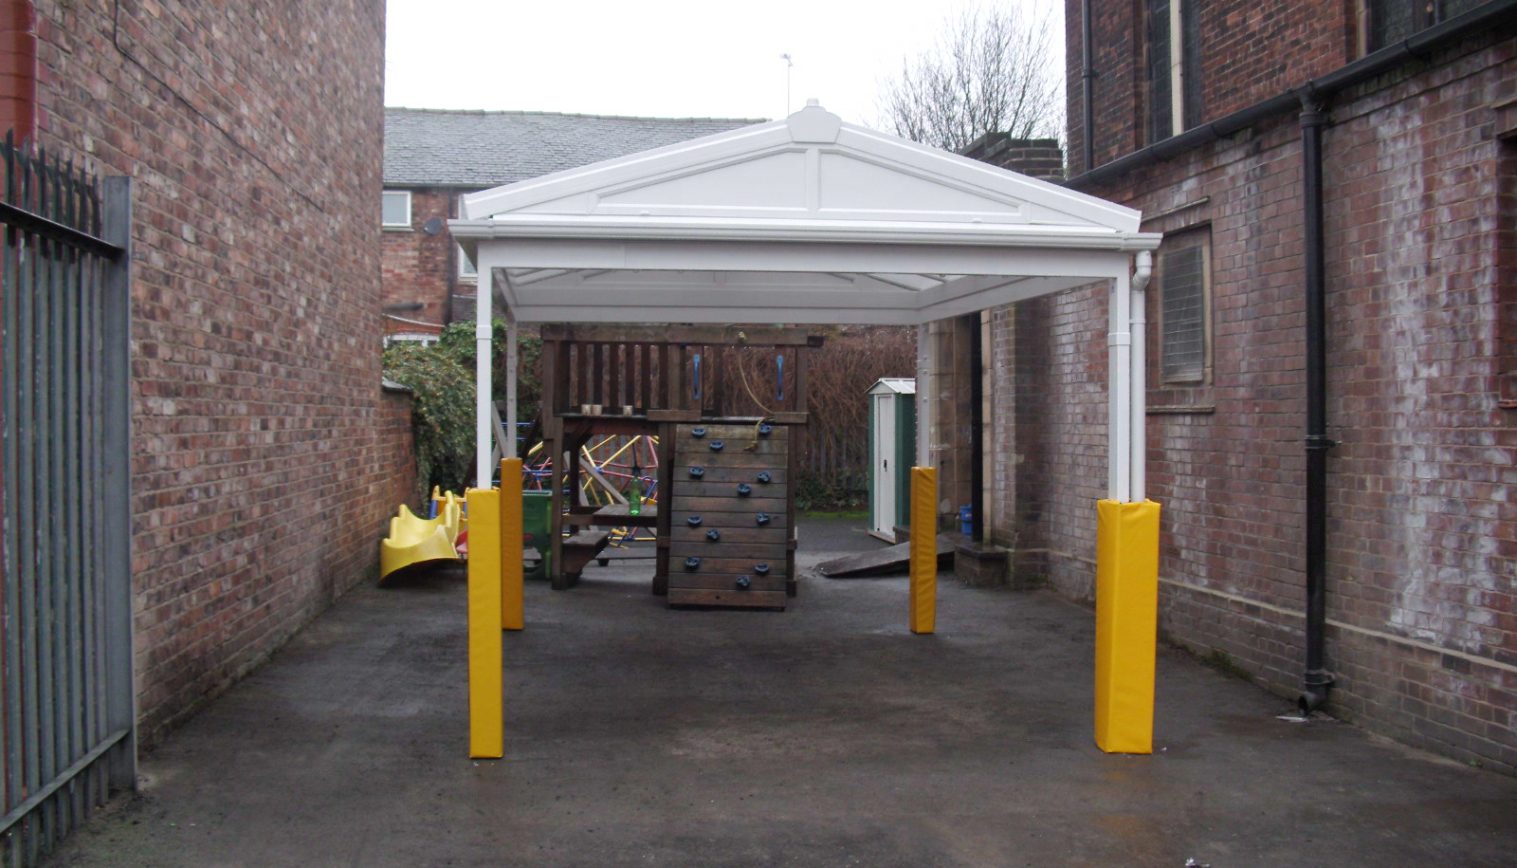 The Vine Playgroup – Free Standing Canopy